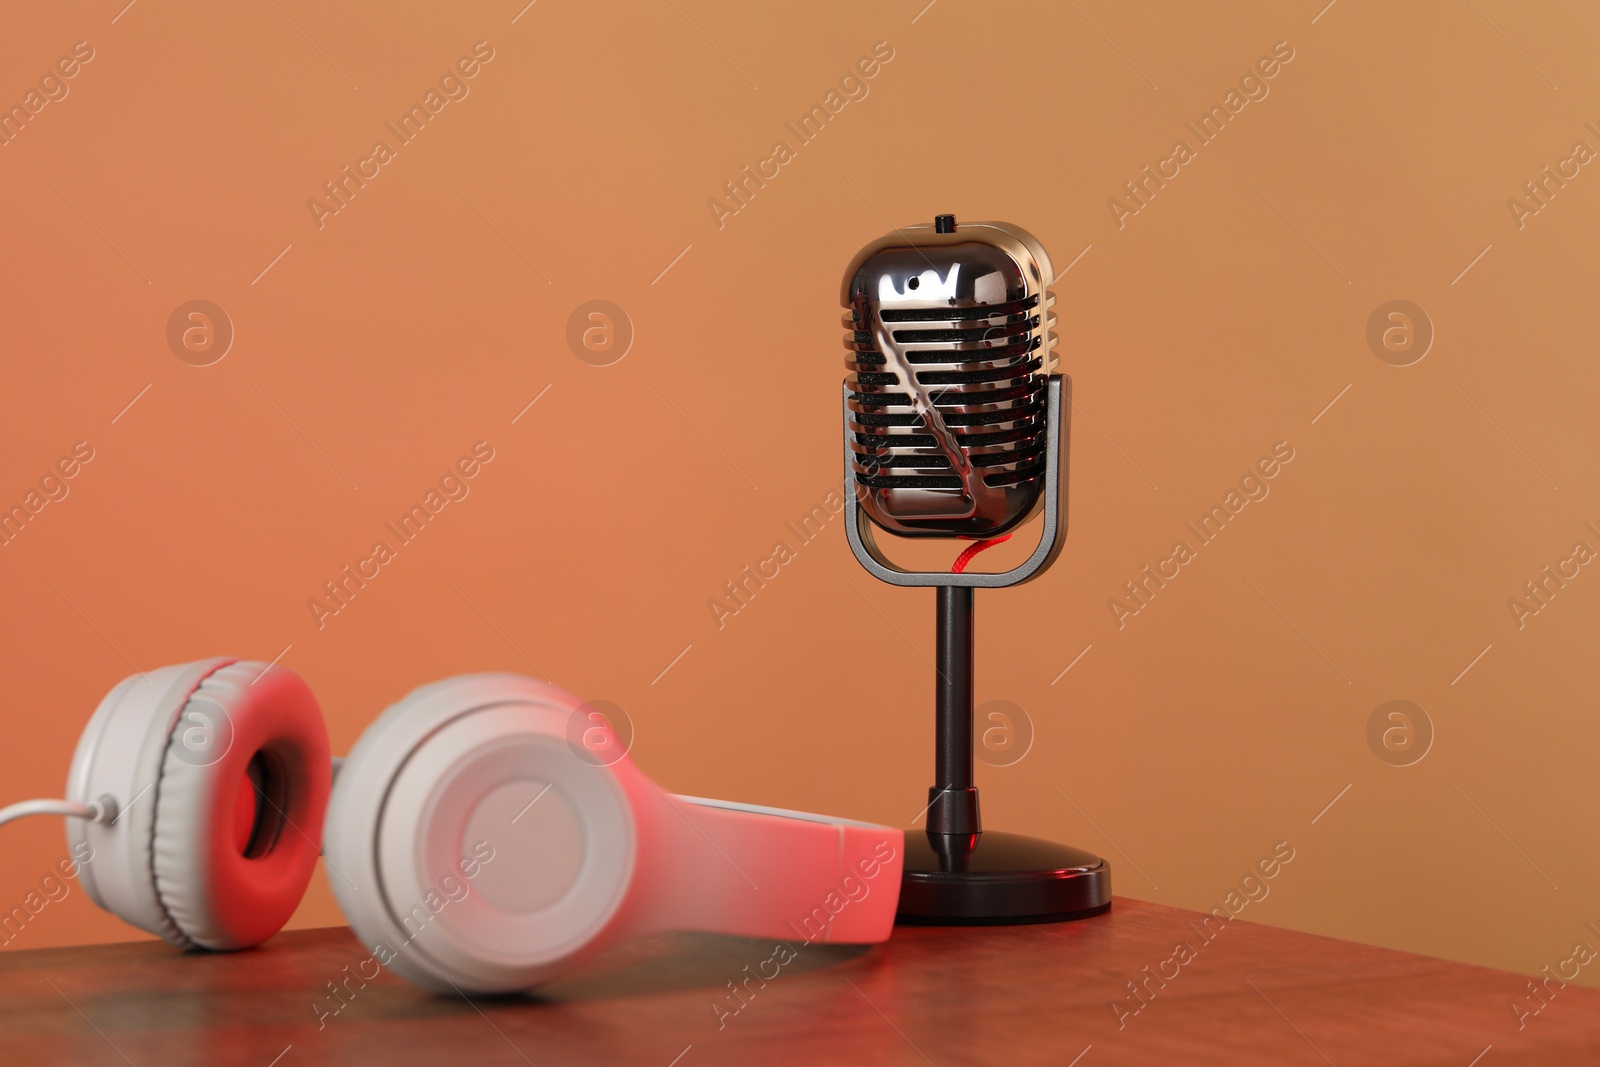 Photo of Vintage microphone and headphones on table against color background. Sound recording and reinforcement